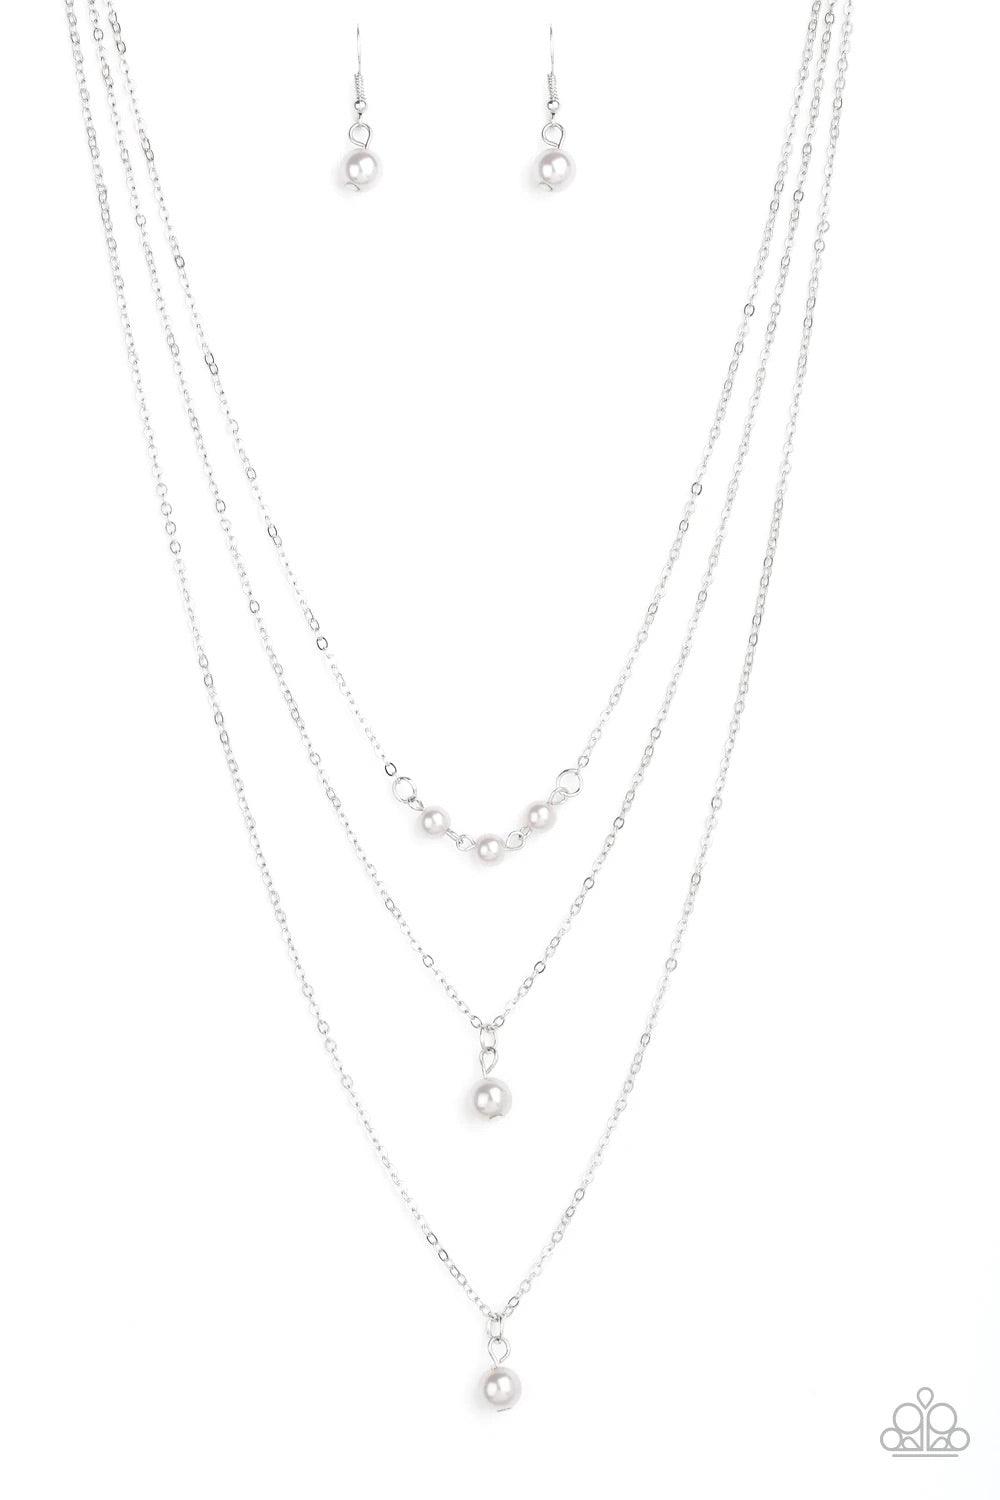 Paparazzi Accessories High Heels and Hustle - Silver A trio of pearly silver beads give way to layers of solitaire silver pearl pendants below the collar for a refined flair. Features an adjustable clasp closure. Jewelry